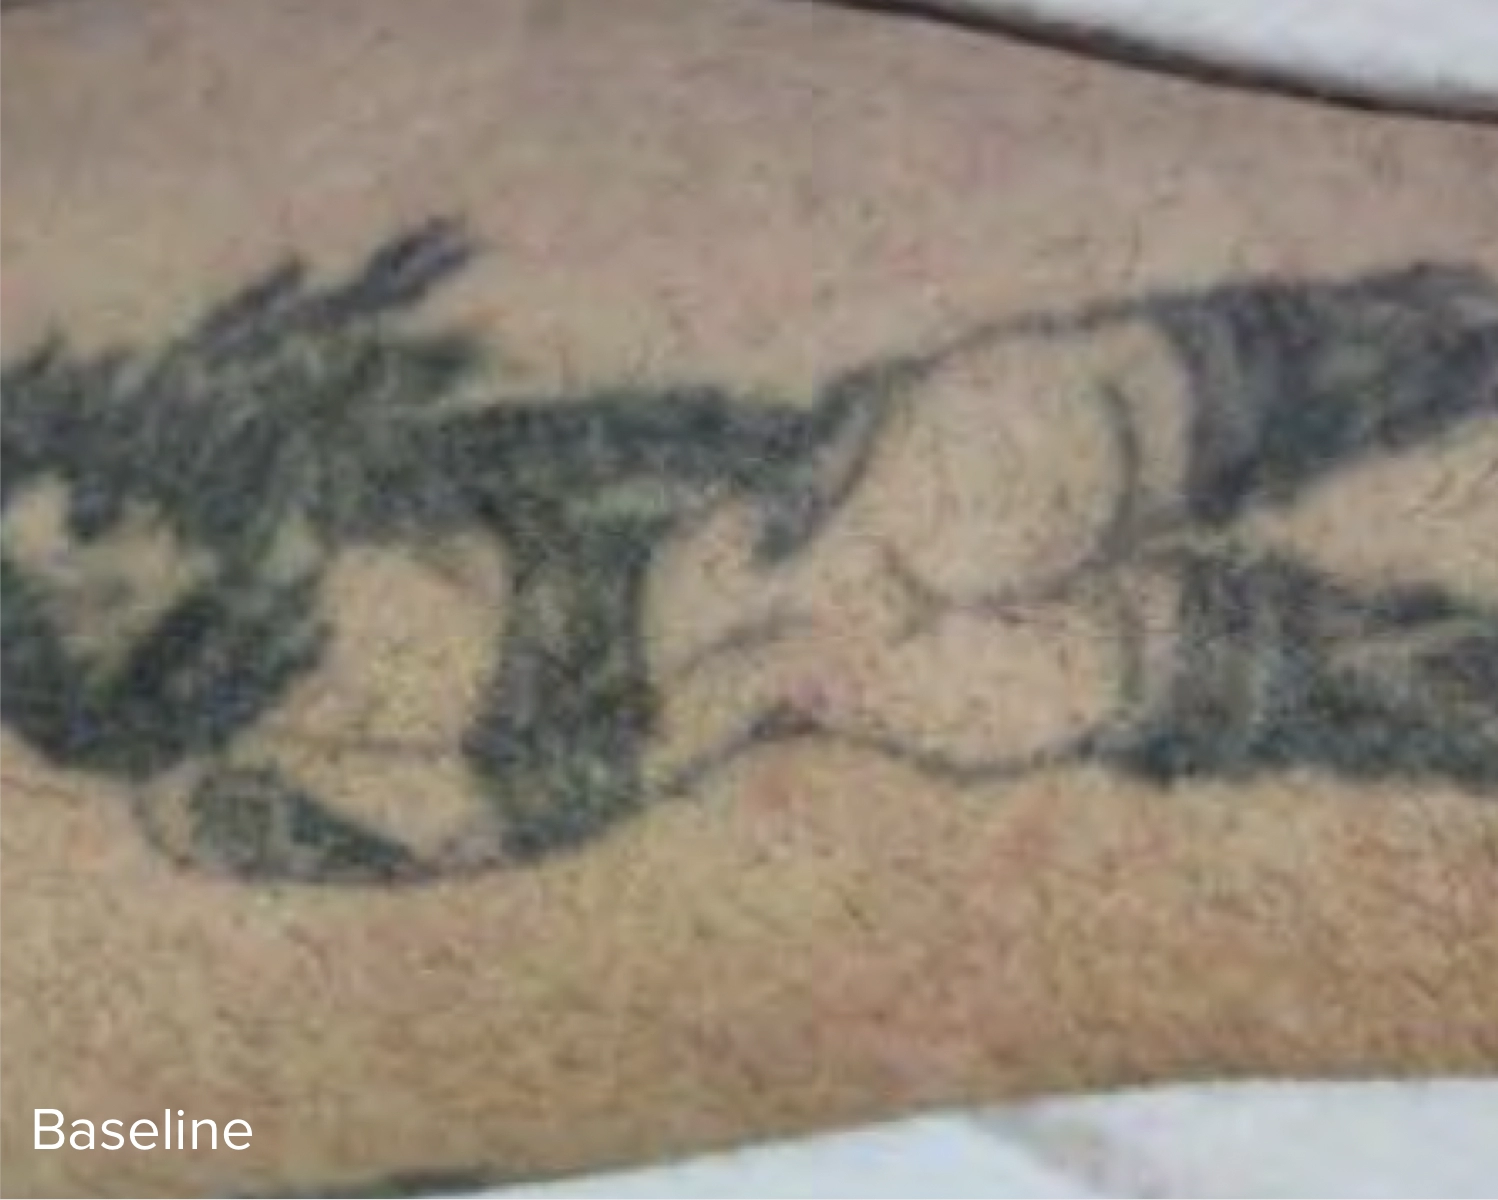 Baseline Laser Tattoo Removal Treatment